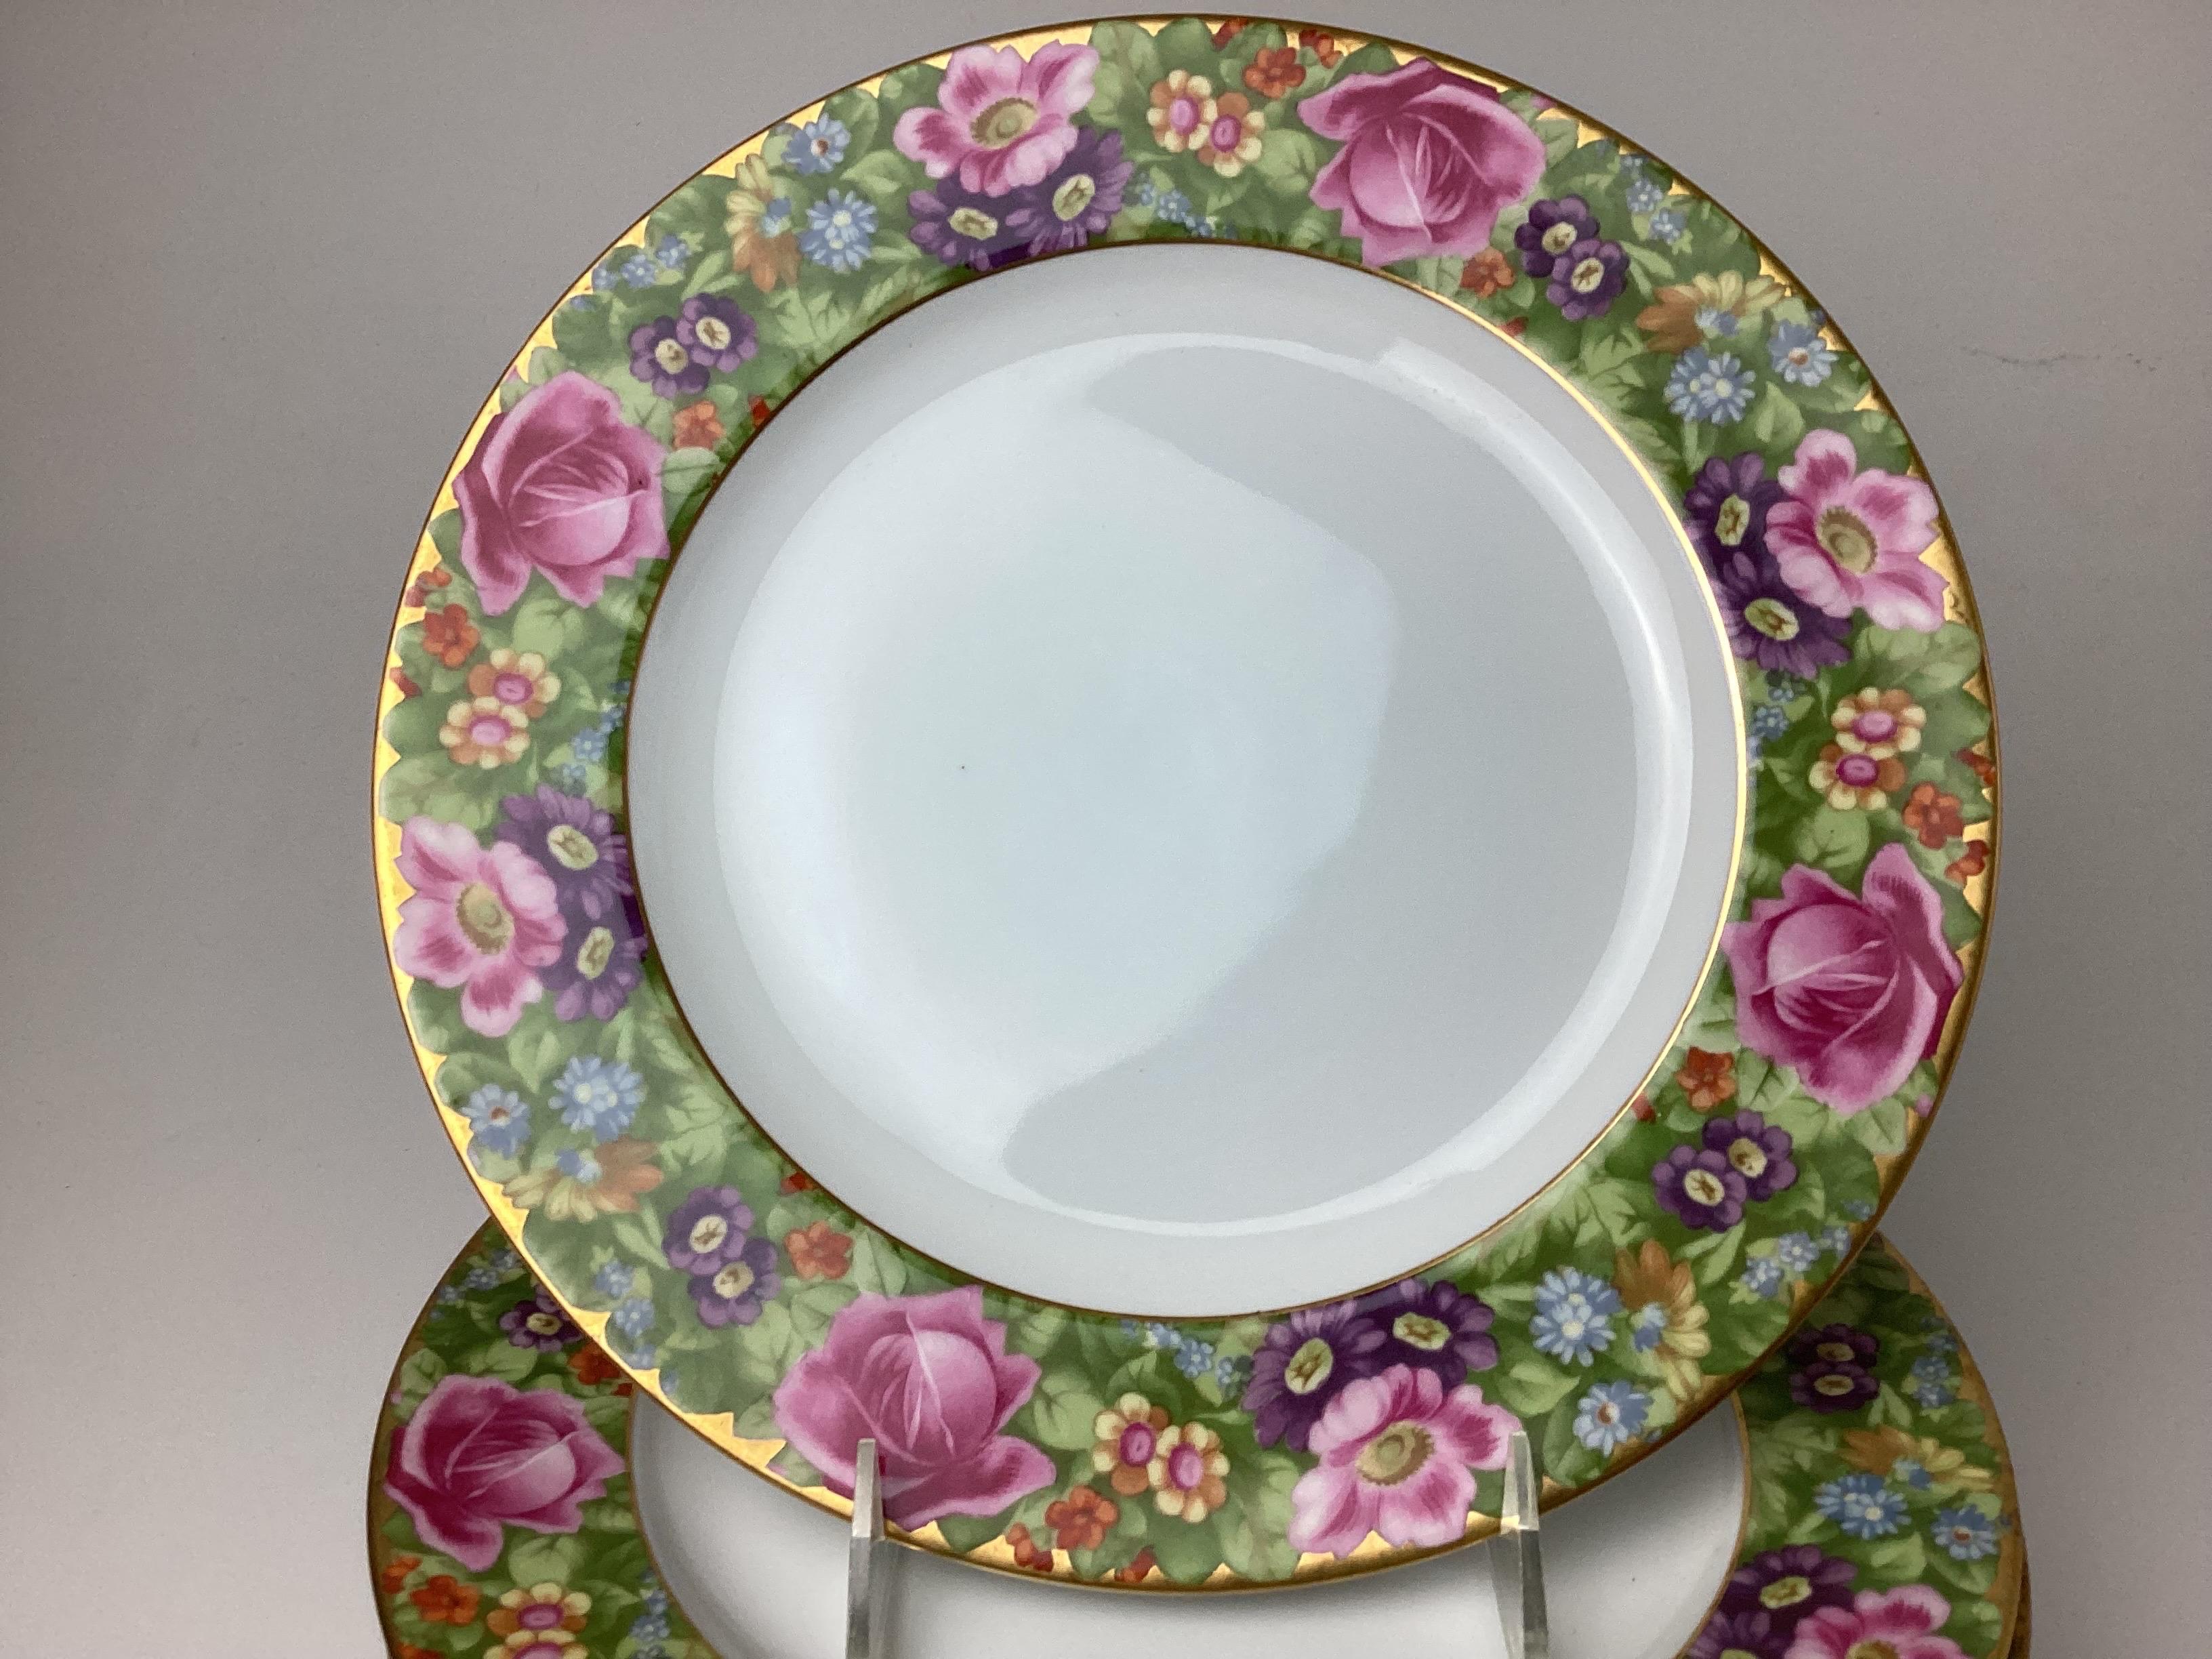 10 Rosenthal Bavaria Pink Rose Floral with Gold Decorative Edge Dinner Plates + 1 for a total of 11.
All in wonderful condition. Very minor age appropriate wear.